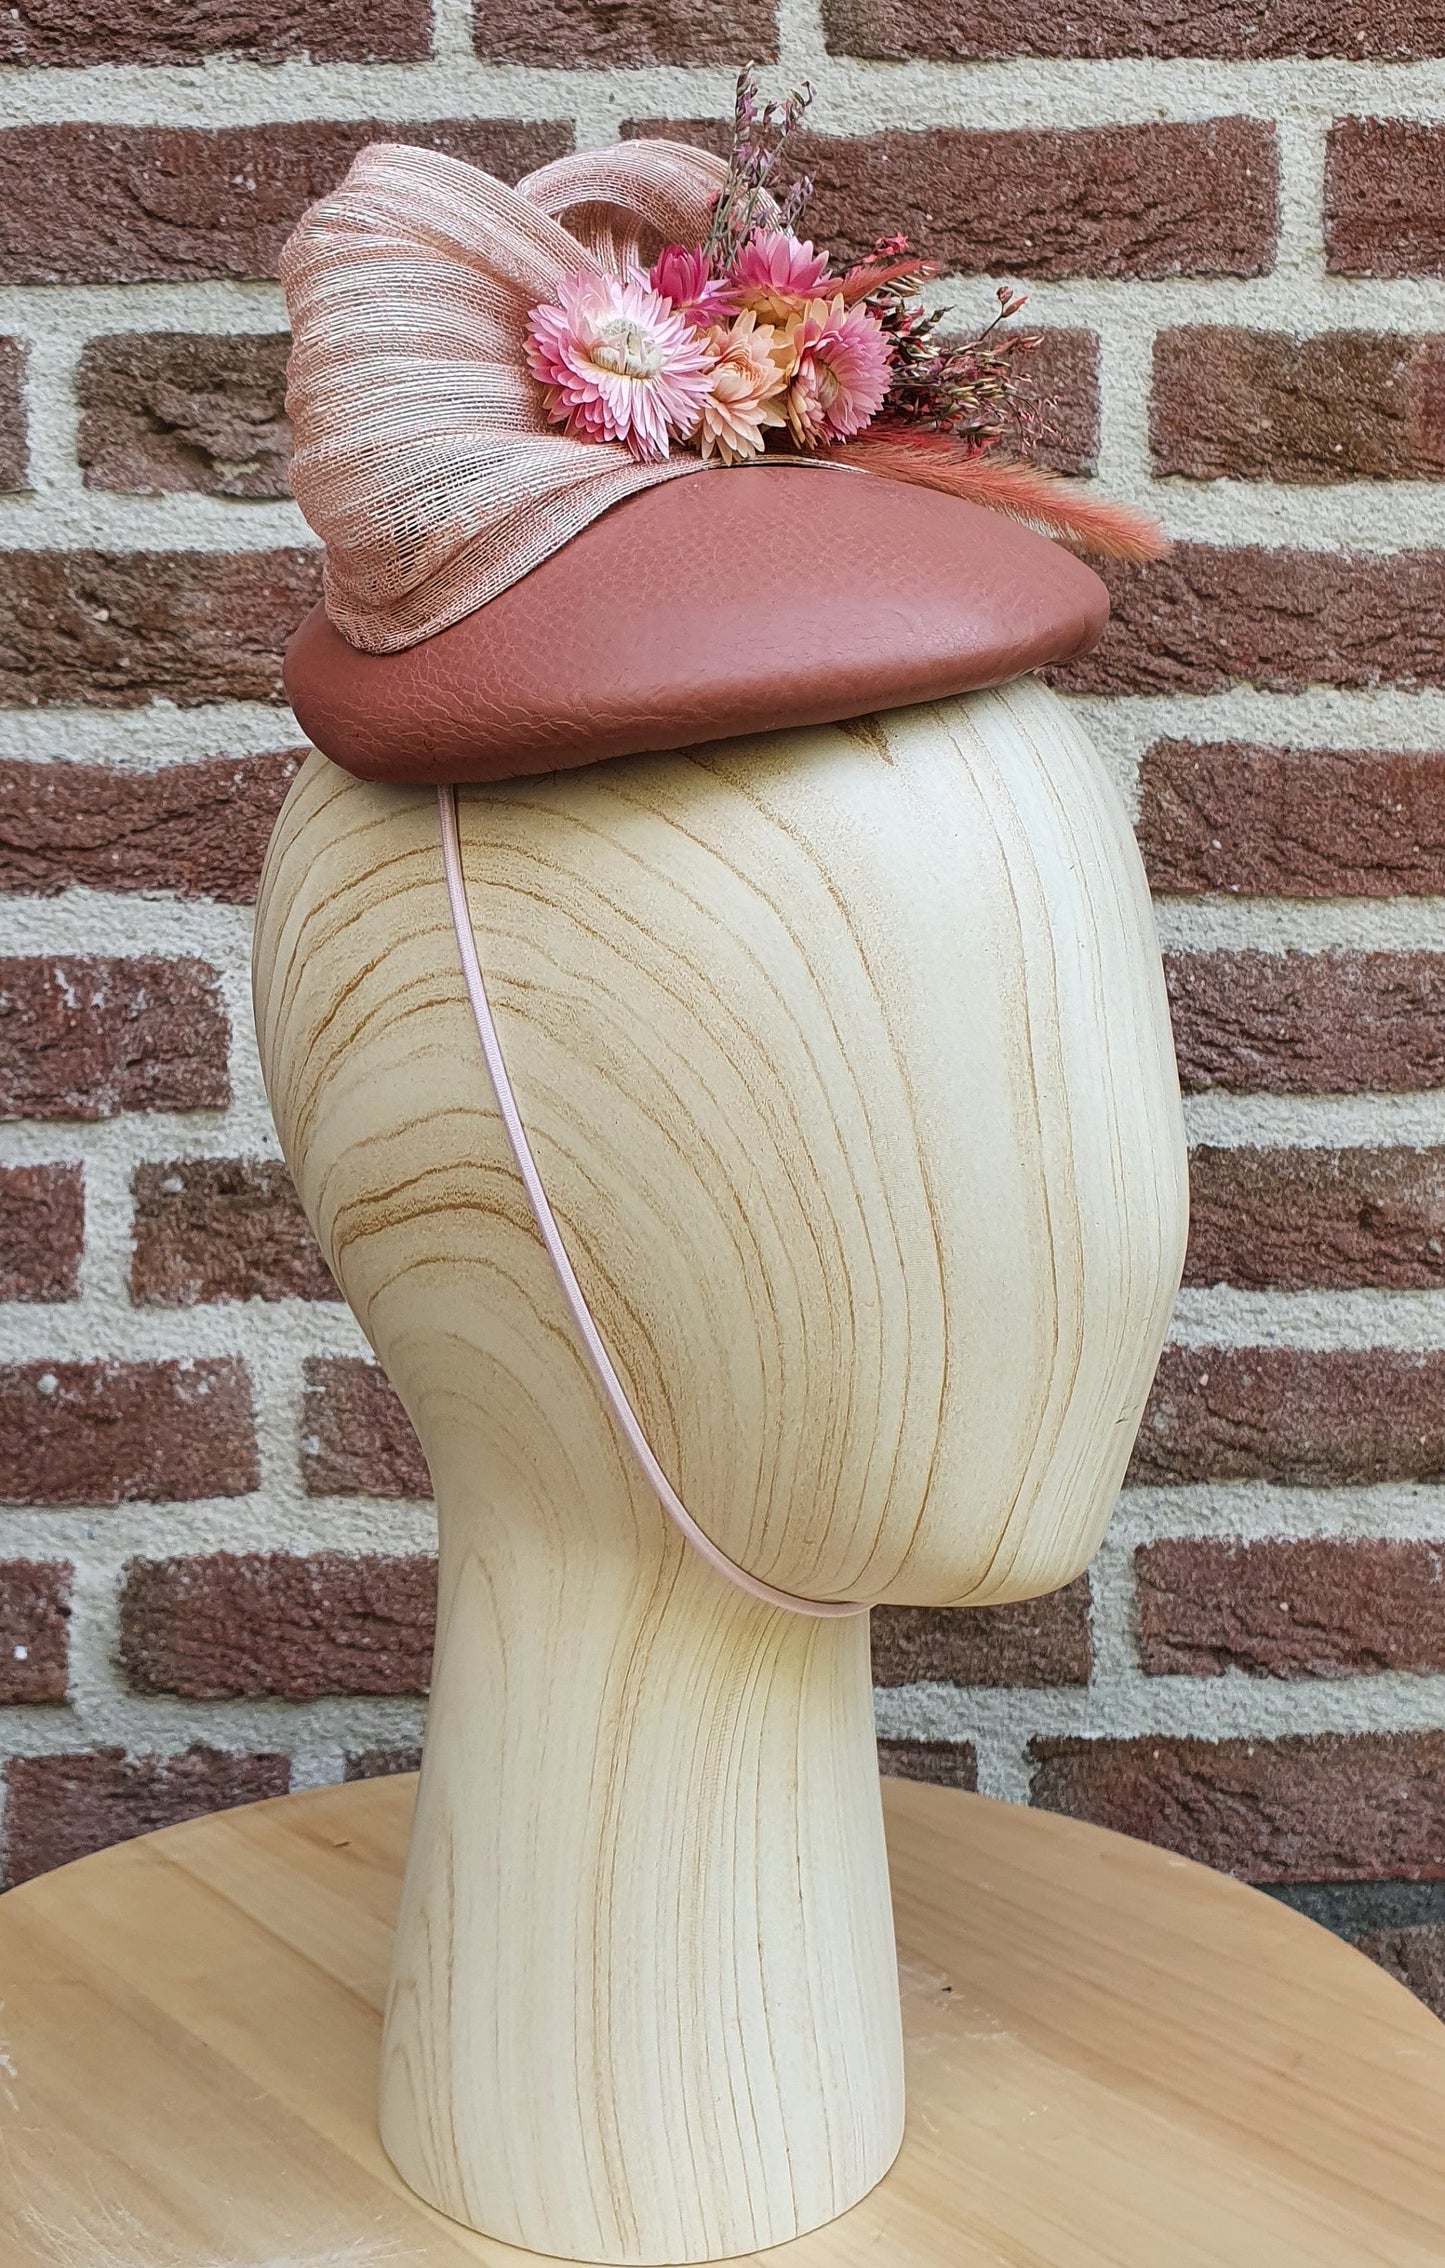 Handmade pink fascinator with natural leather guest hat, elegant headdress - for a wedding or special occasion